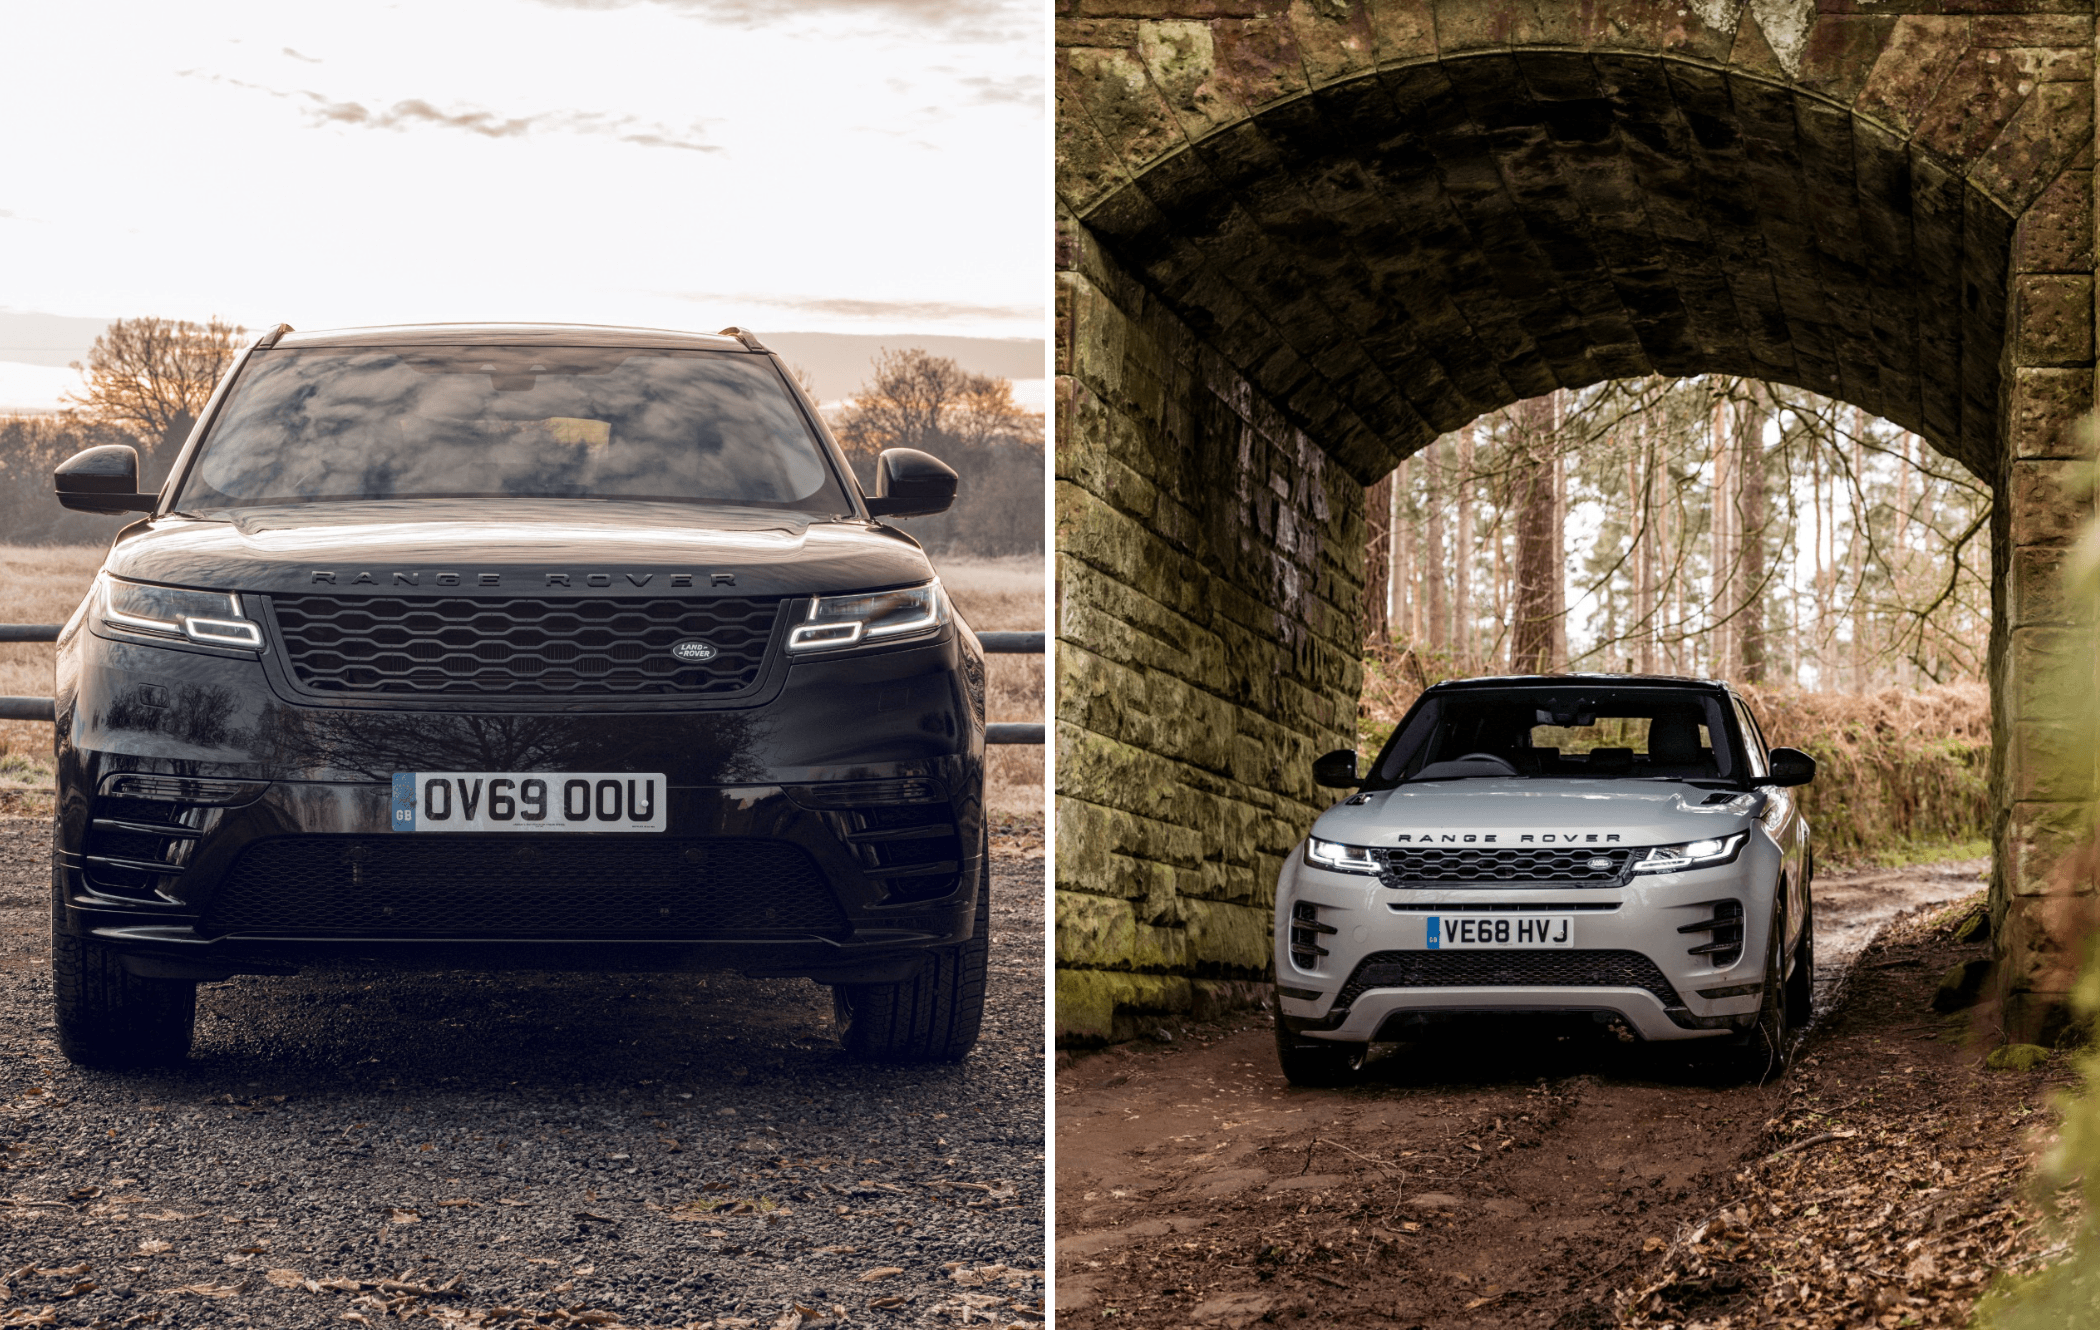 on the left is a black range rover velar and on the right is a white evoque under a bridge